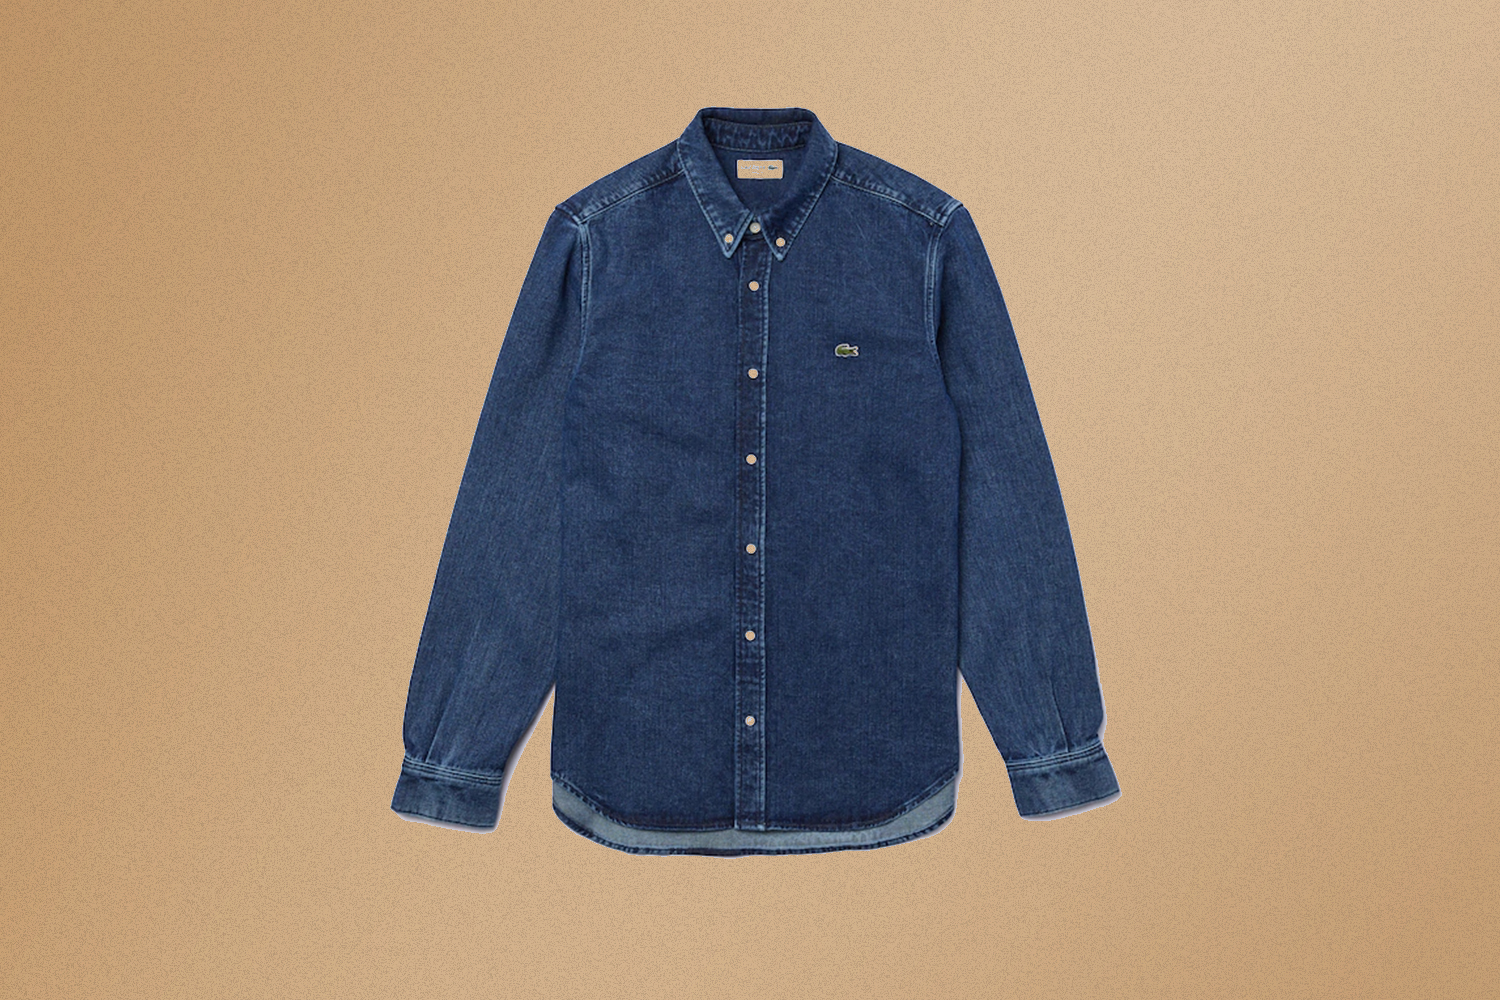 Deal: This Classic Lacoste Denim Shirt Is 50% Off